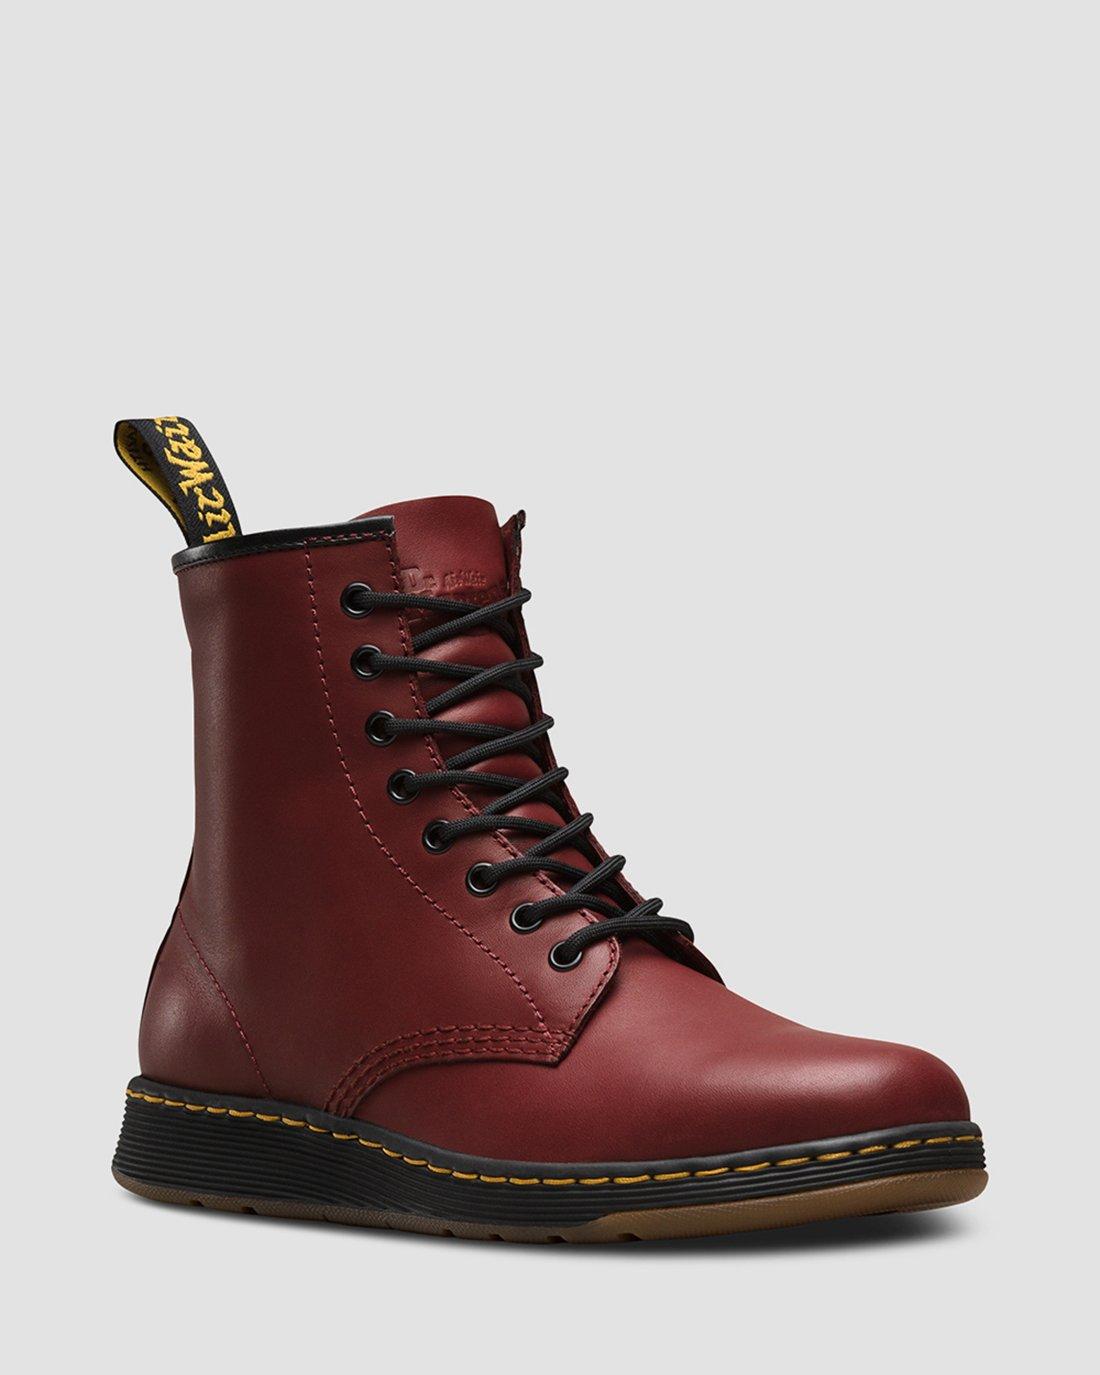 dr martens safety boots canada